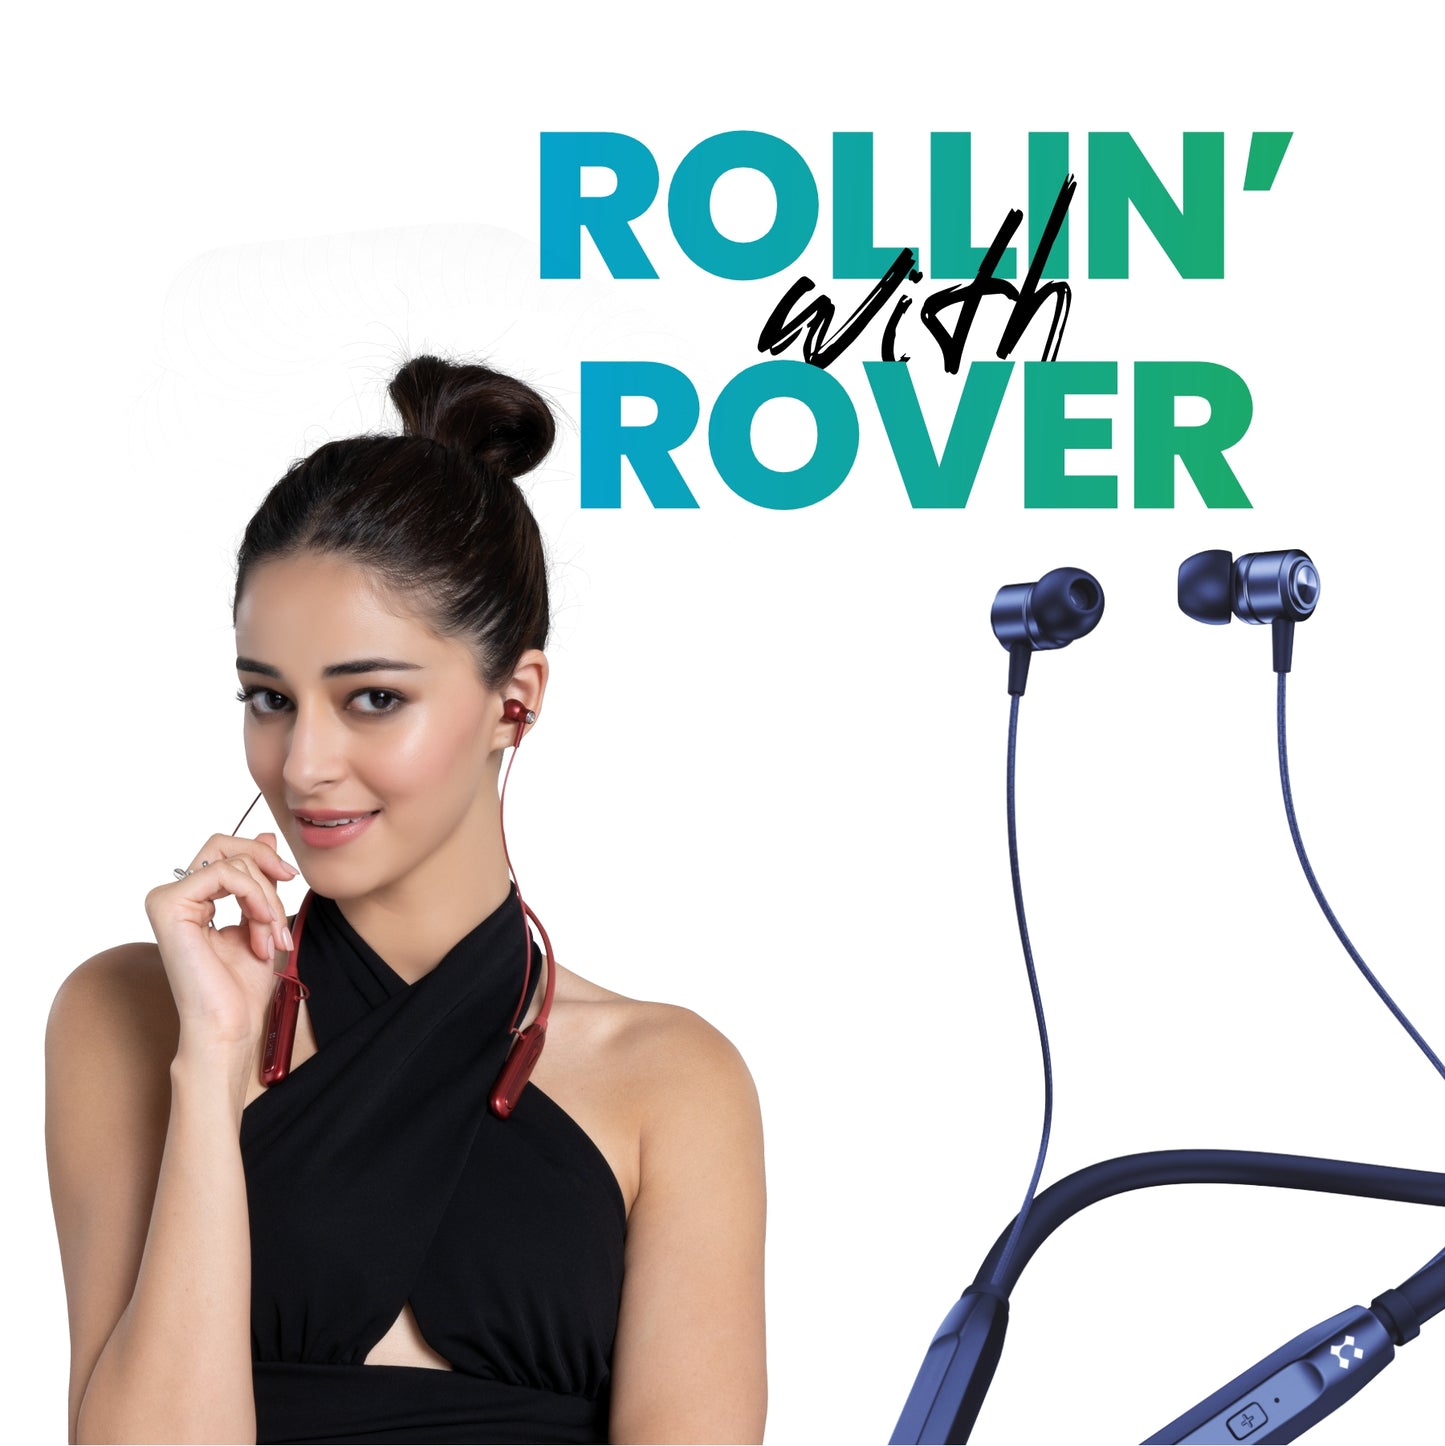 LYNE Rover 1 25 Hours Music Time Bluetooth Neckband with Magnetic Earbuds & Mic